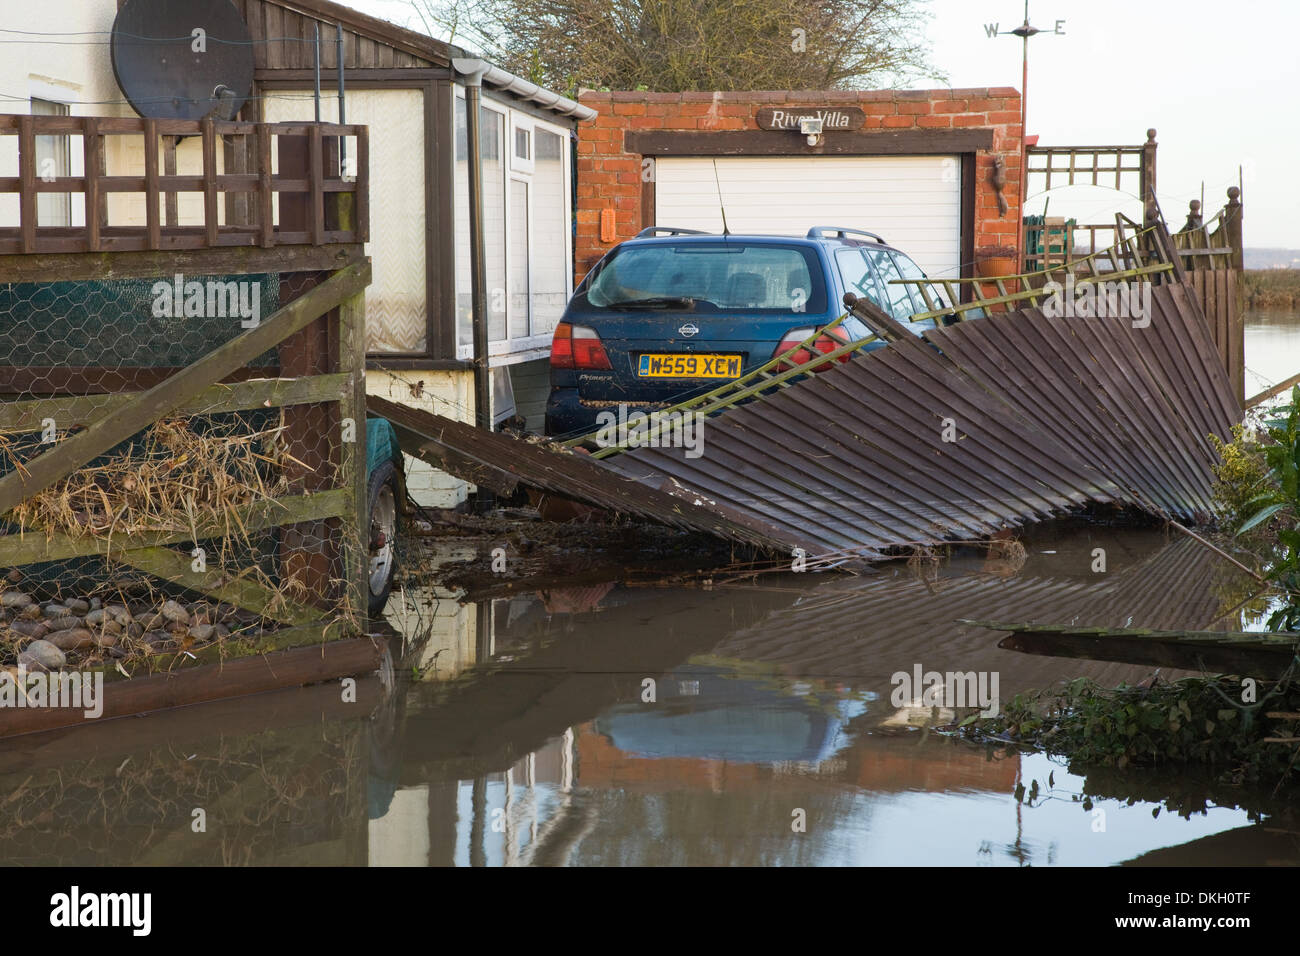 South Ferriby, North Lincolnshire, England, UK. 6th December 2013. A property in the North Lincolnshire village of South Ferriby near the River Humber, which has been damaged by the tidal surge. South Ferriby, North Lincolnshire, England, UK. 6th December 2013. Credit:  LEE BEEL/Alamy Live News Stock Photo